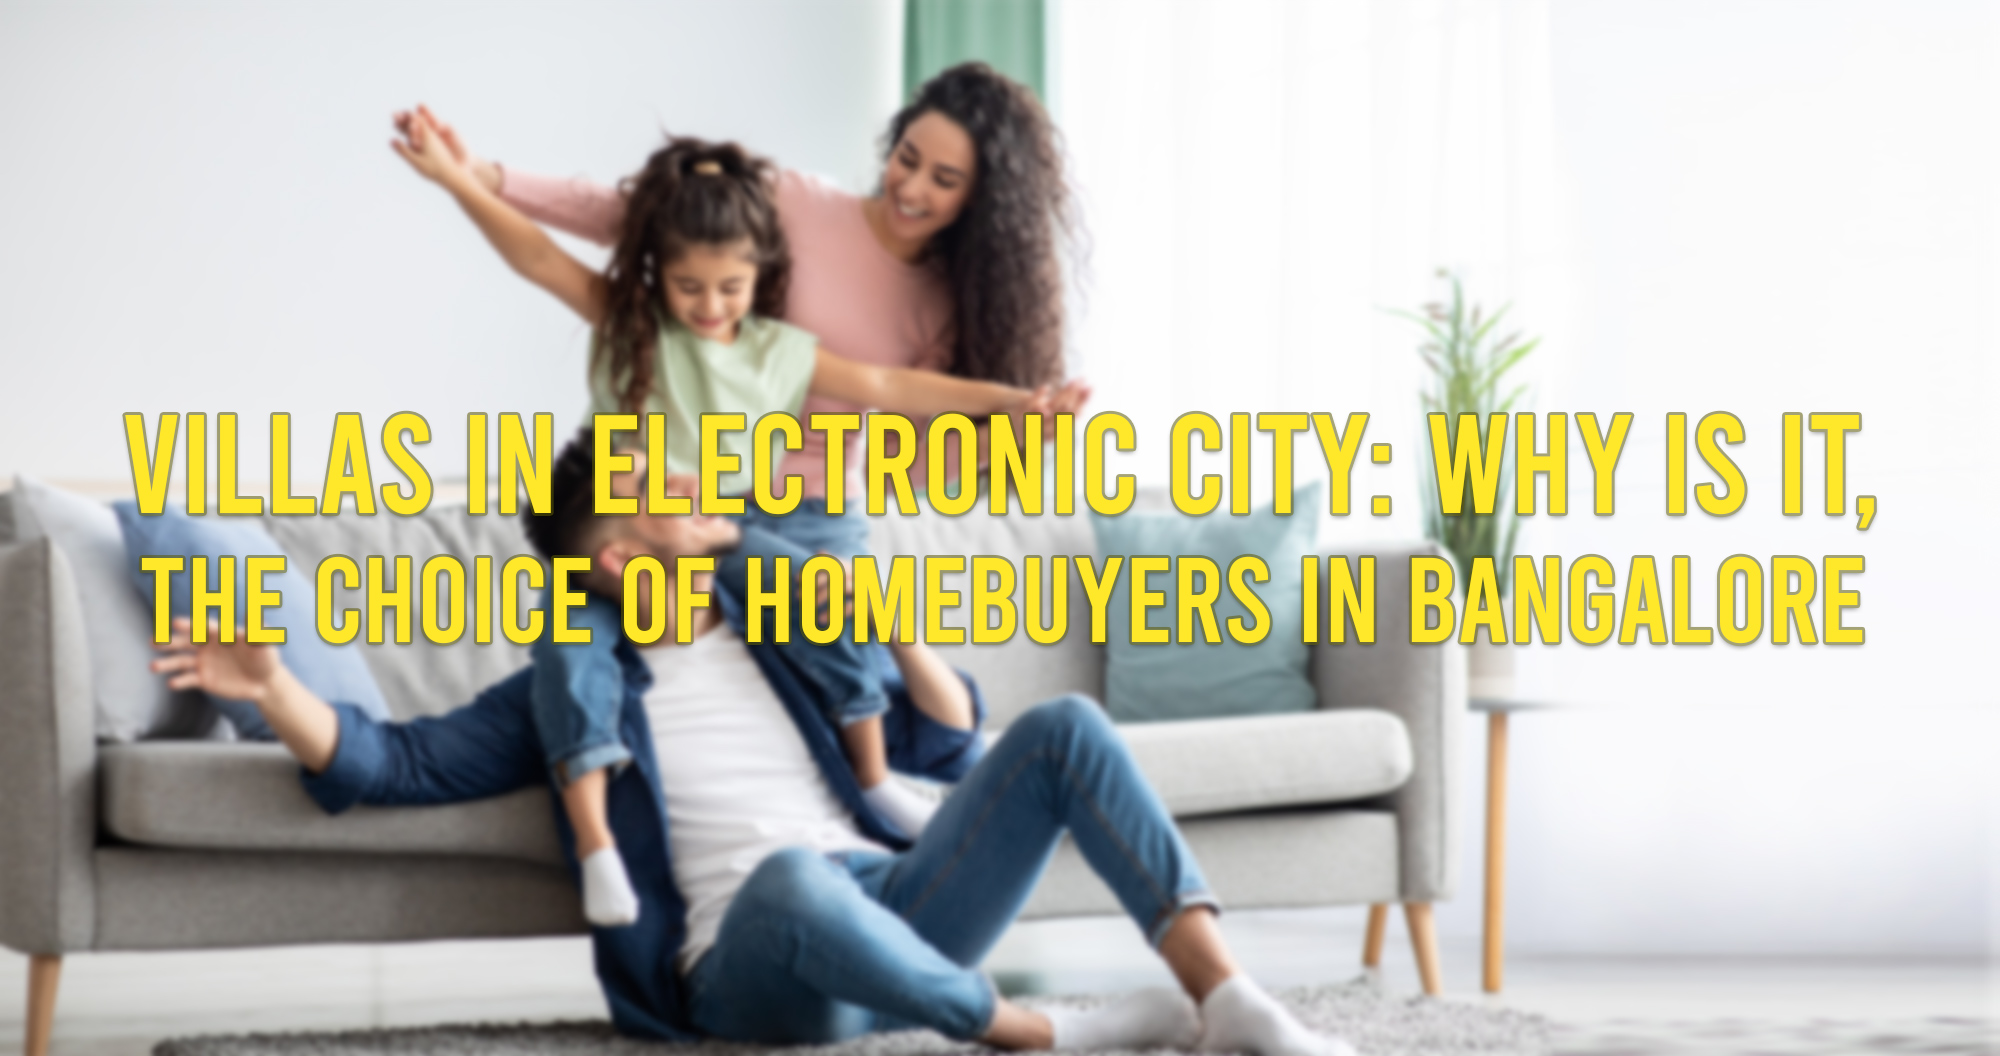 Villas in Electronic City: why is it, the choice of Homebuyers in Bangalore